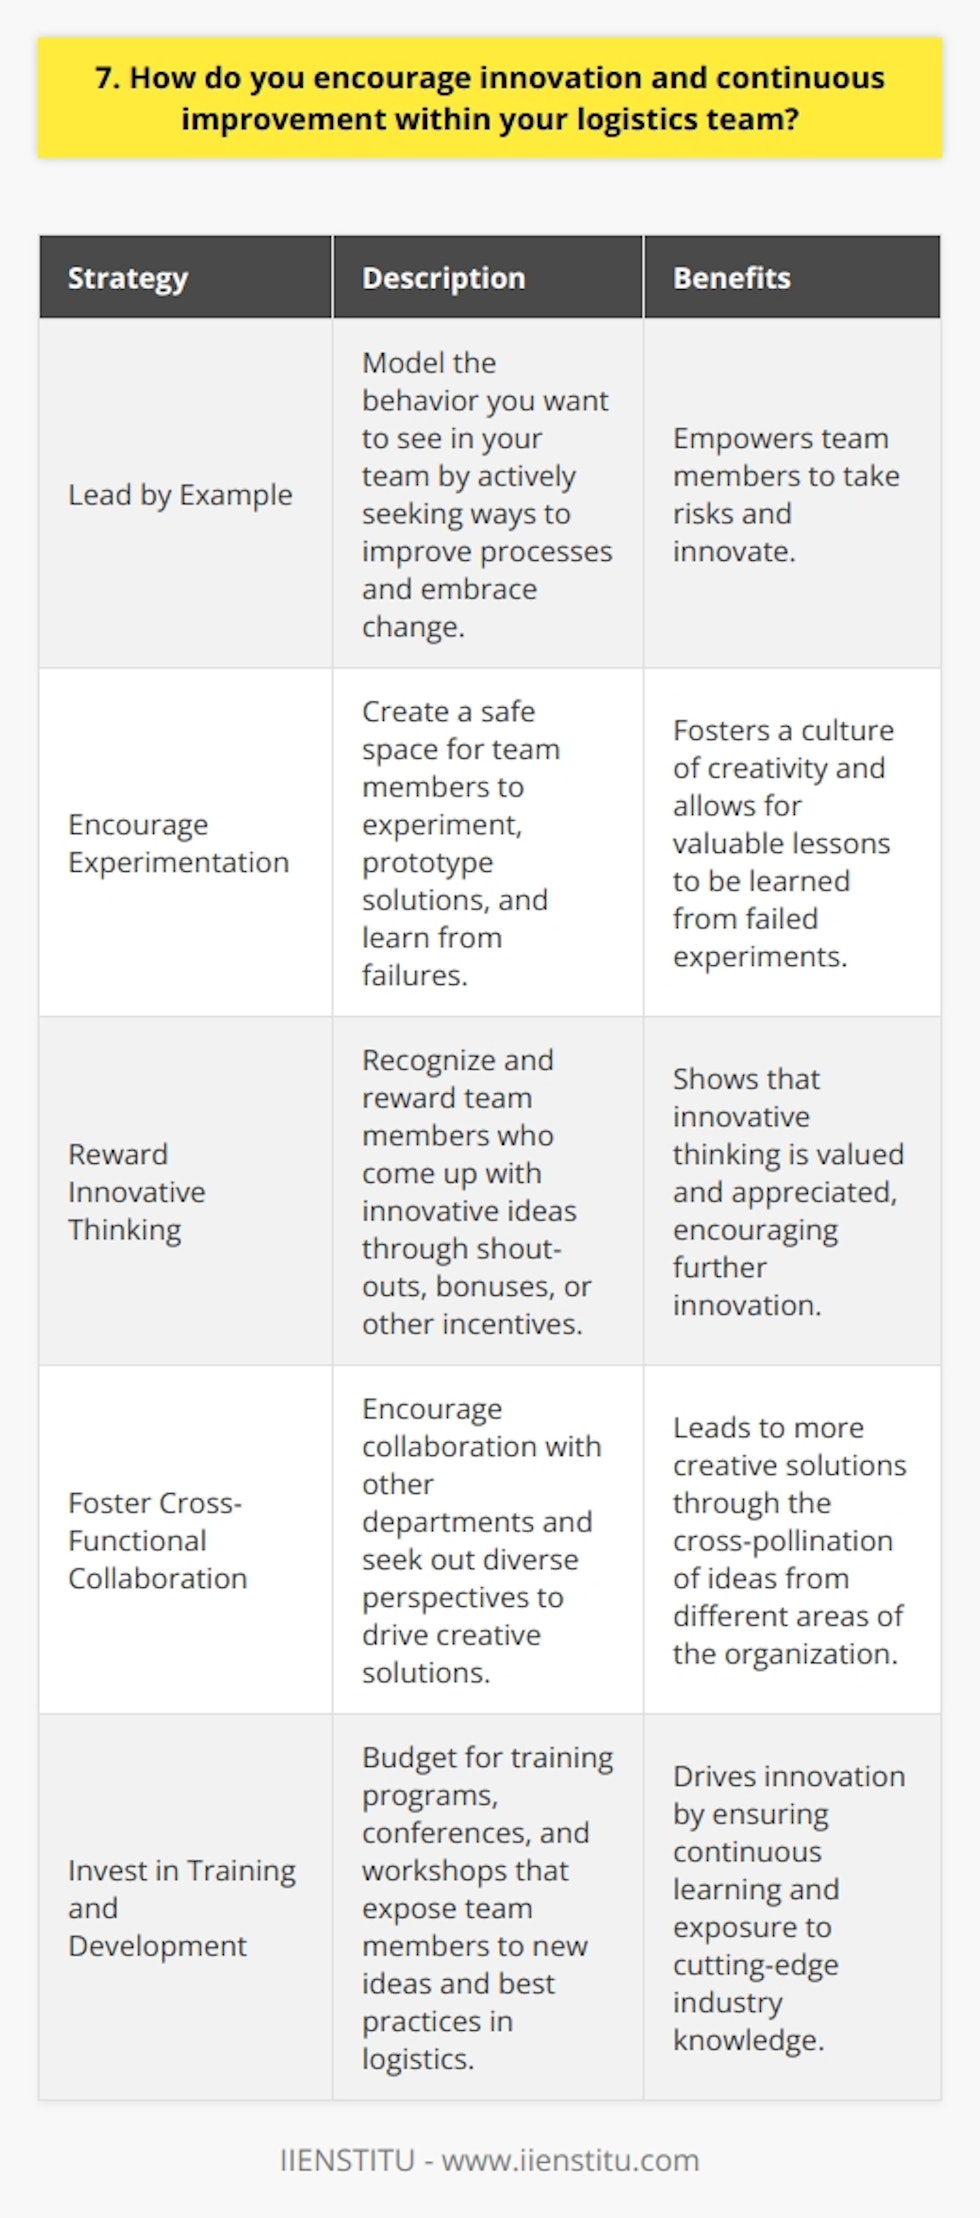 I believe that encouraging innovation and continuous improvement within a logistics team is crucial for staying competitive. Here are some strategies I use to foster a culture of innovation: Lead by Example I strive to model the behavior I want to see in my team. Im always looking for ways to improve processes and try out new ideas. When my team sees me taking risks and embracing change, they feel empowered to do the same. Encourage Experimentation I create a safe space for my team to experiment and try new things. We have regular brainstorming sessions where no idea is too crazy. I encourage them to prototype solutions and learn from failures. Some of our best innovations have come from failed experiments that taught us valuable lessons. Reward Innovative Thinking I believe in recognizing and rewarding team members who come up with innovative ideas. It could be something as simple as a shout-out in a team meeting or a small bonus. The key is to show that innovative thinking is valued and appreciated. Foster Cross-Functional Collaboration I encourage my team to collaborate with other departments and seek out diverse perspectives. We often invite colleagues from sales, marketing, and finance to join our brainstorming sessions. Cross-pollination of ideas leads to more creative solutions. Invest in Training and Development I believe in investing in my teams skills and knowledge. I budget for training programs, conferences, and workshops that expose them to new ideas and best practices in logistics. Continuous learning is essential for driving innovation. By creating a culture that encourages experimentation, rewards innovative thinking, and invests in continuous learning, I believe we can drive significant improvements in our logistics operations.